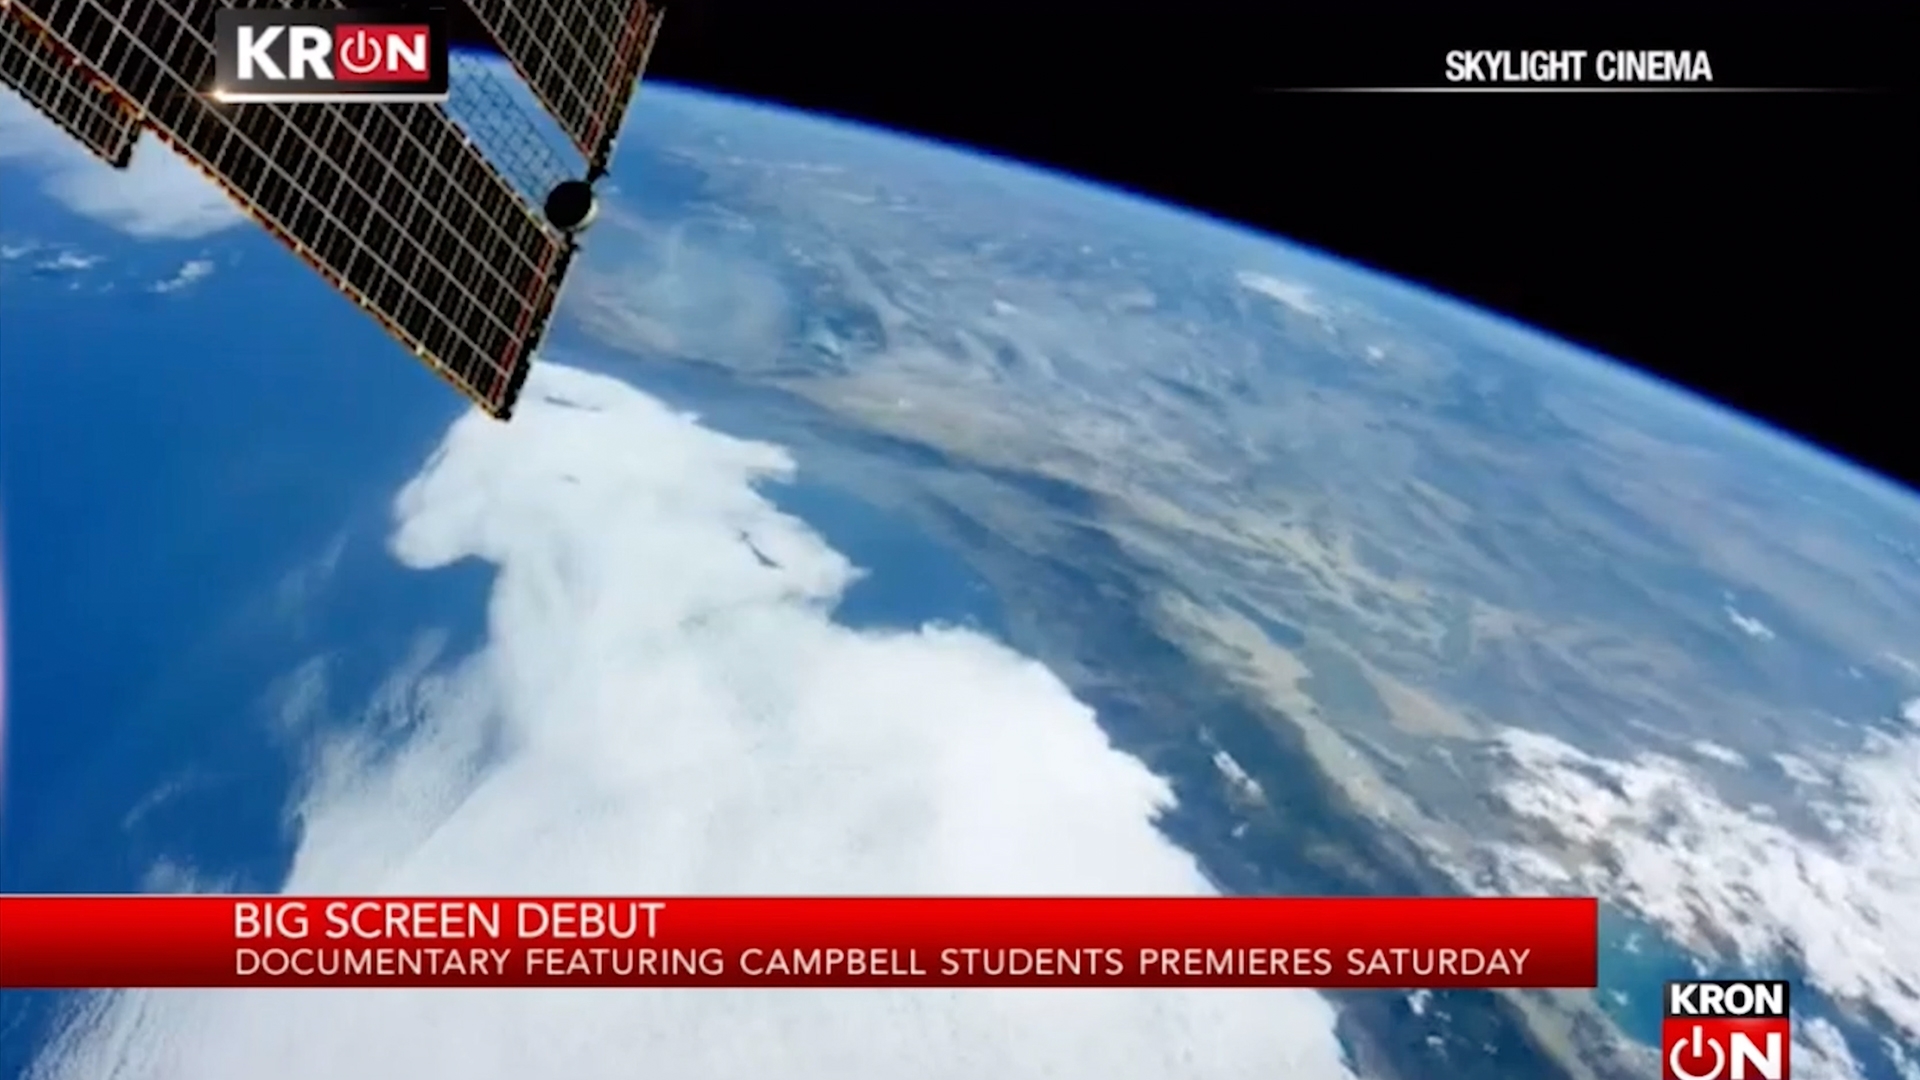 KRON4: “An Afterschool program that’s out of this world, literally!”